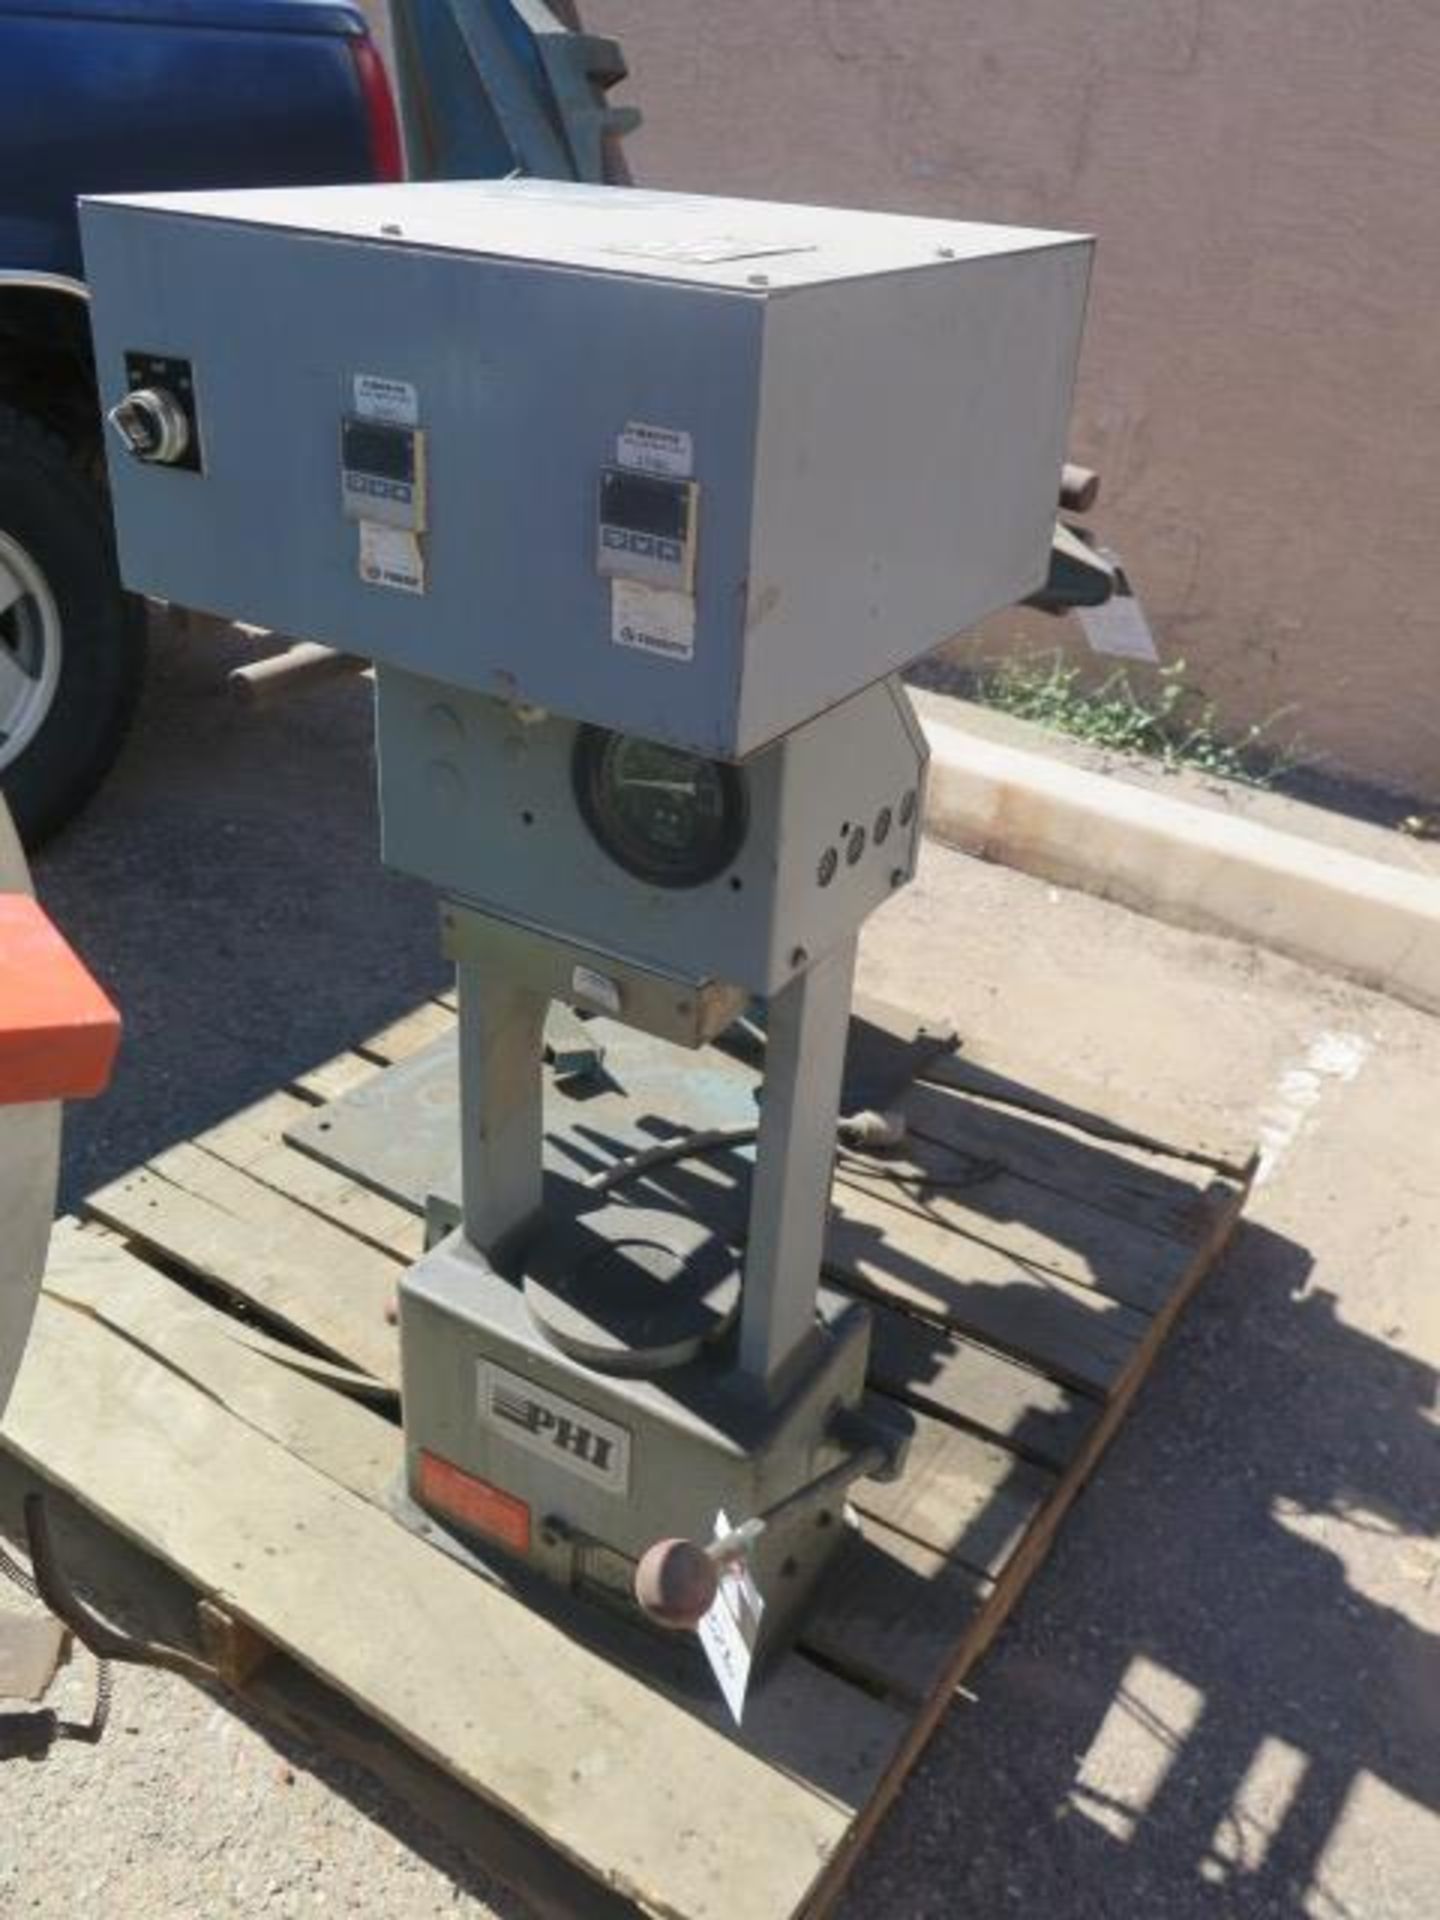 PHI mdl. 215H 4000 PSI Hydraulic Test Stand s/n 88-1-002 (SOLD AS-IS - NO WARRANTY)